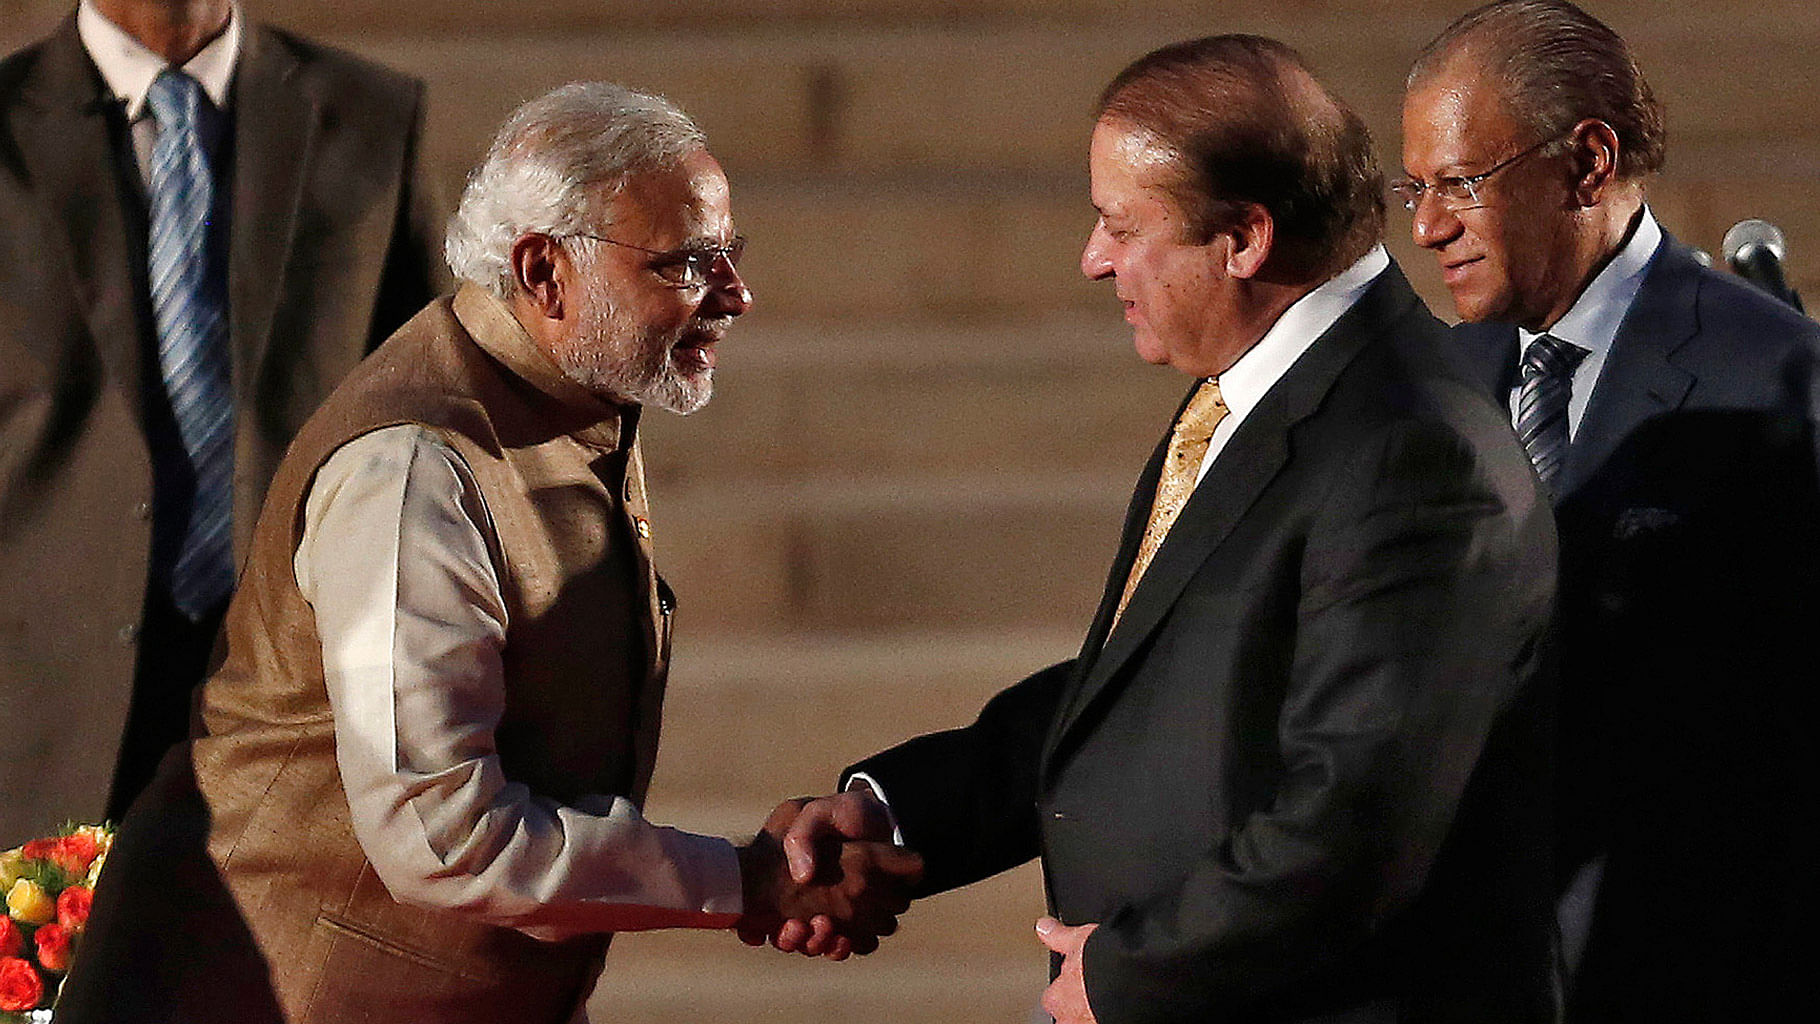   Prime Minister Narendra Modi (L) is greeted by his Pakistani counterpart Nawaz Sharif after Modi took the oath of office in New Delhi May 26, 2014. (Photo: Reuters)